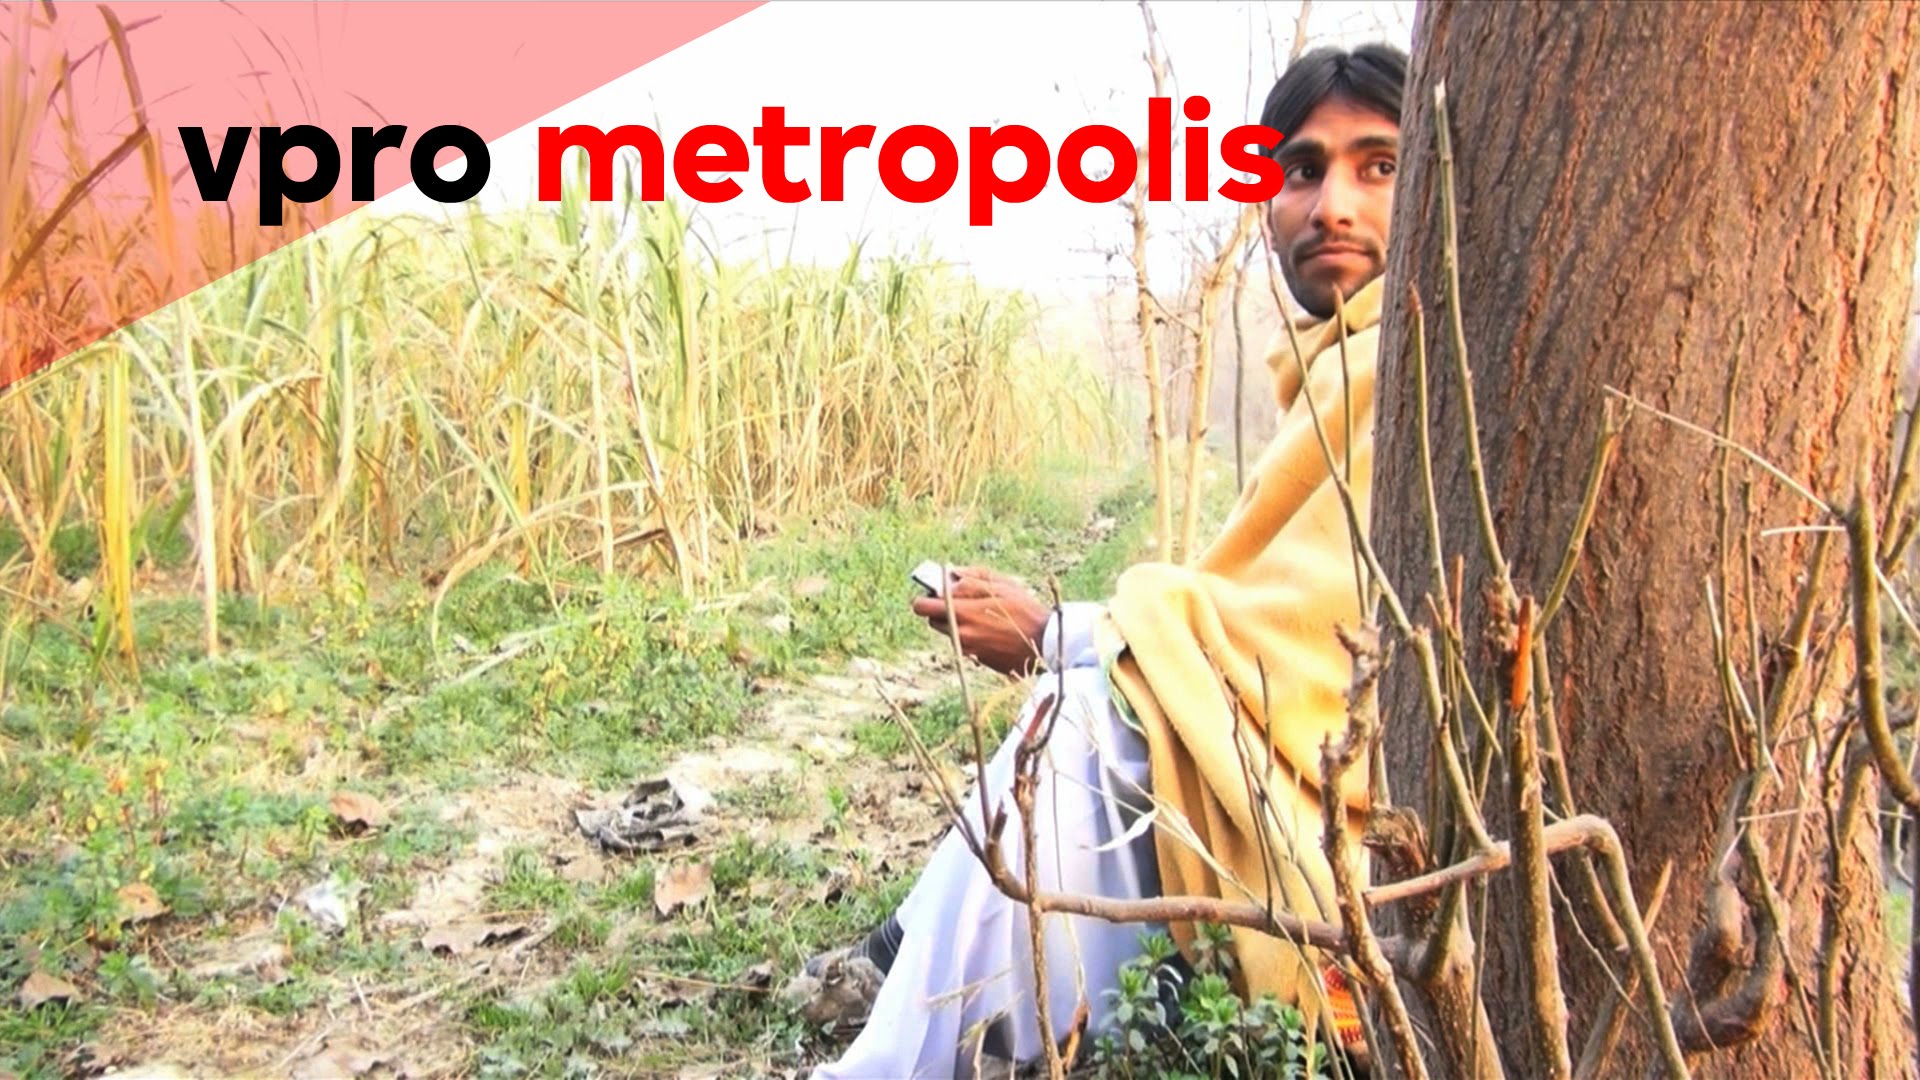 hiding in the bushes to watch porn in pakistan vpro metropolis youtube